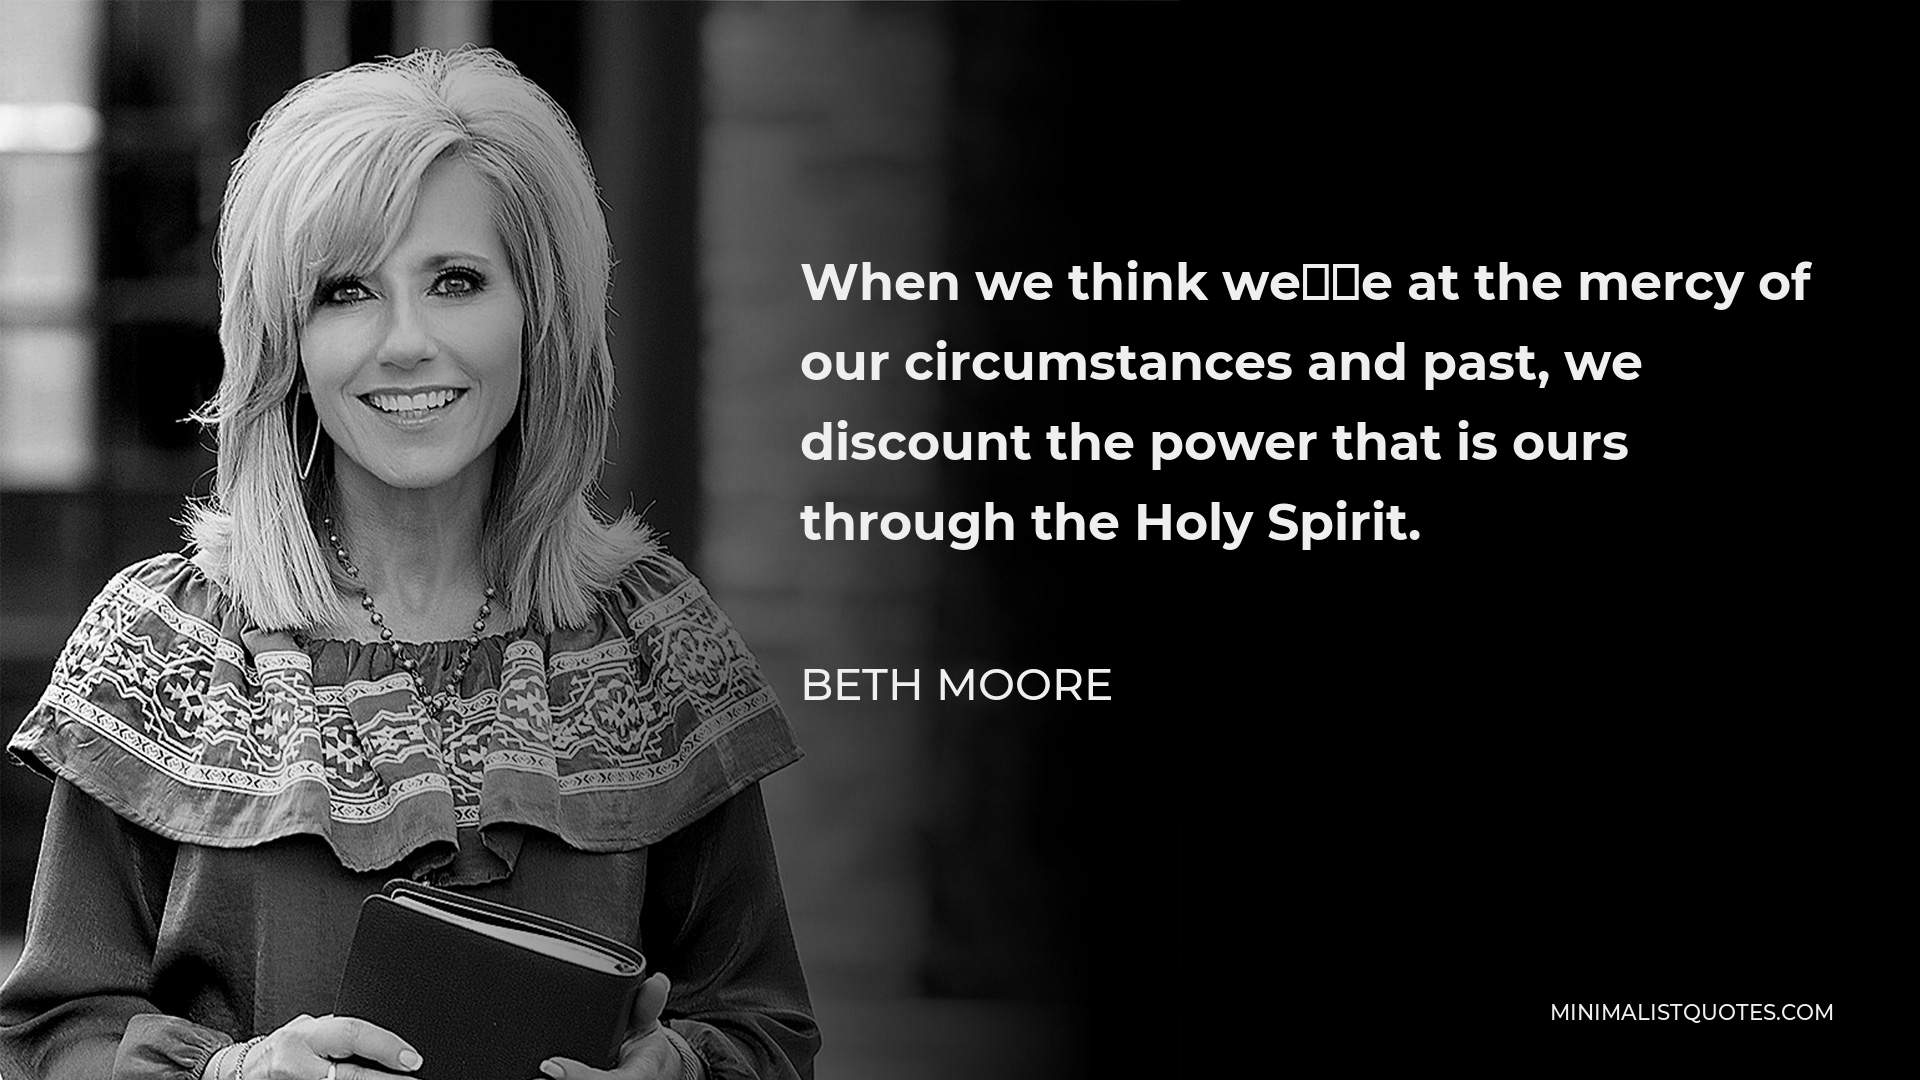 Beth Moore Quote - When we think we’re at the mercy of our circumstances and past, we discount the power that is ours through the Holy Spirit.